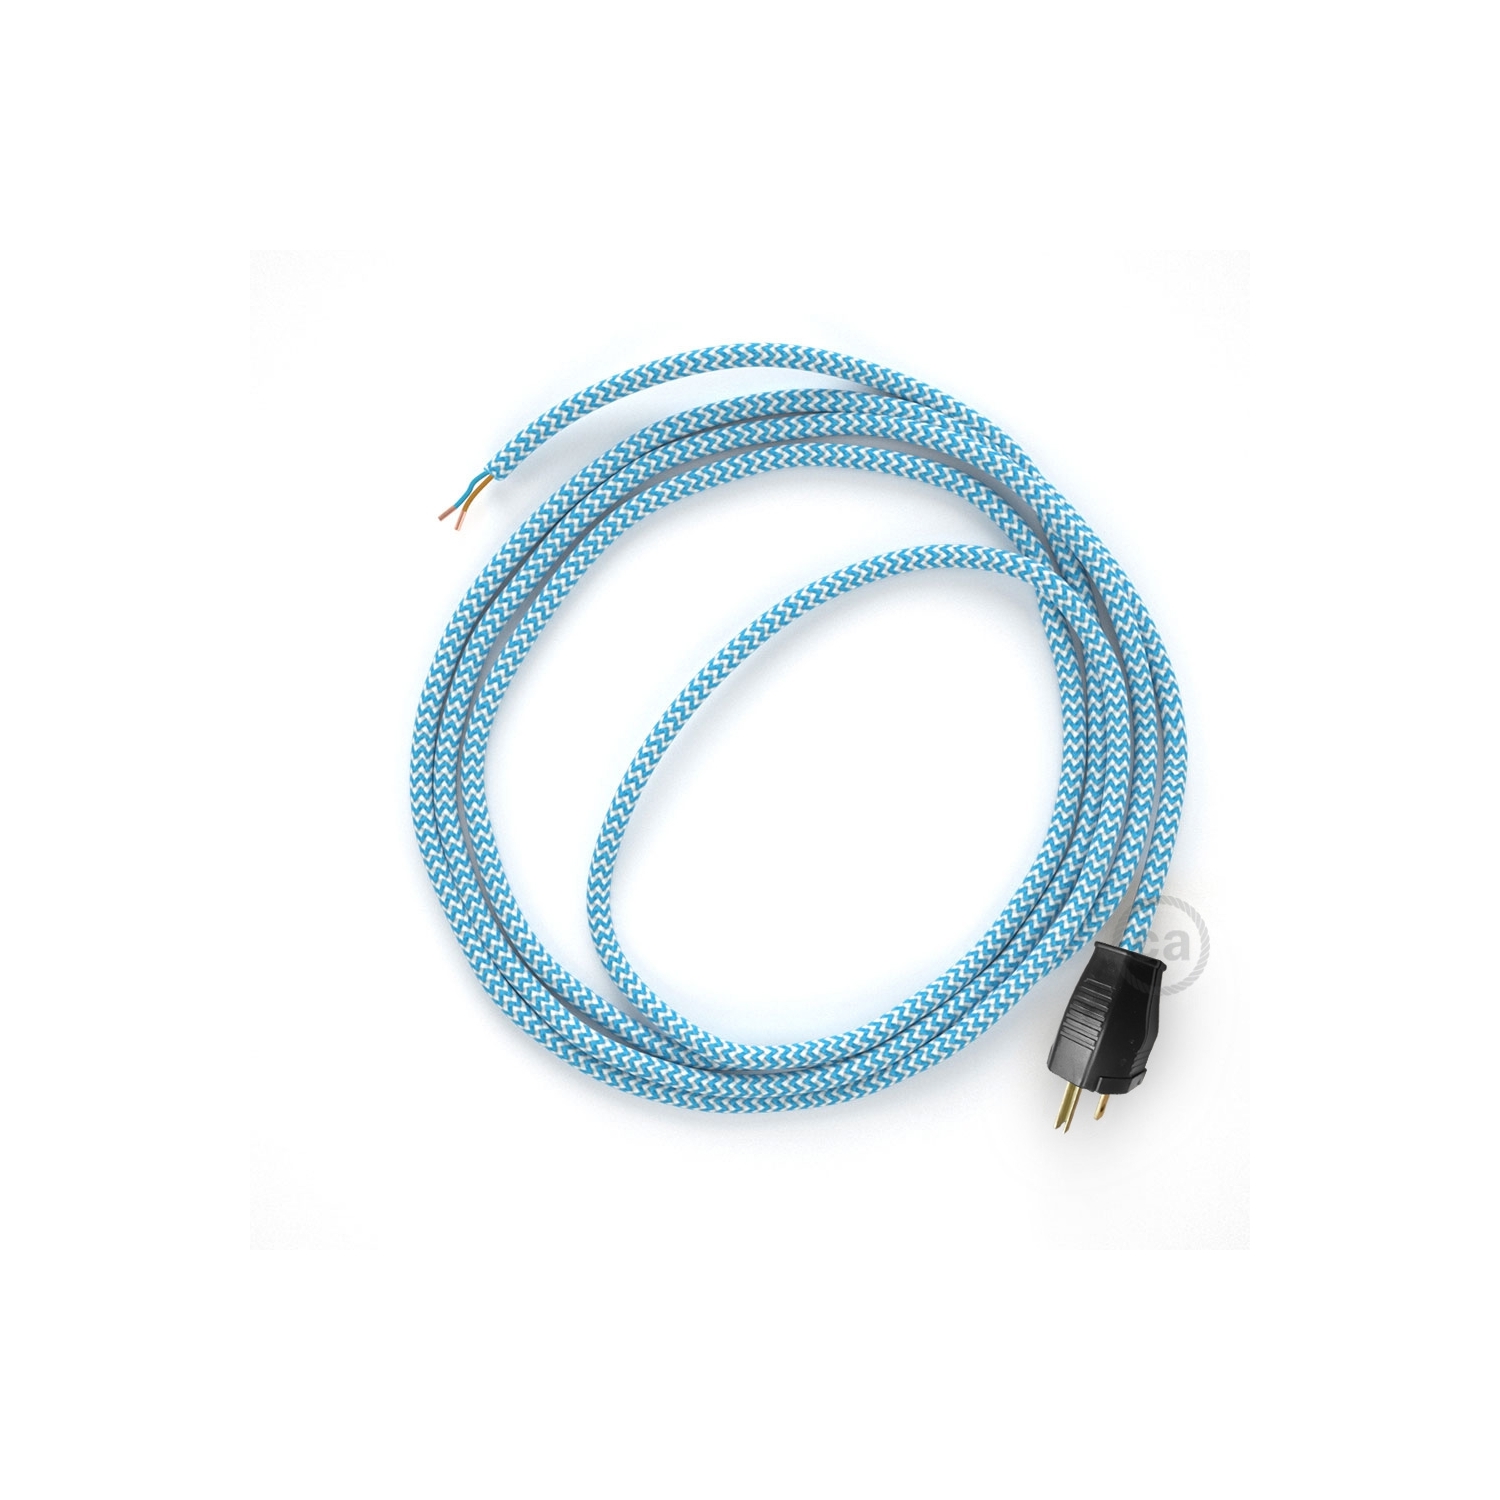 Cord-set - RZ11 Light Blue & White Chevron Covered Round Cable